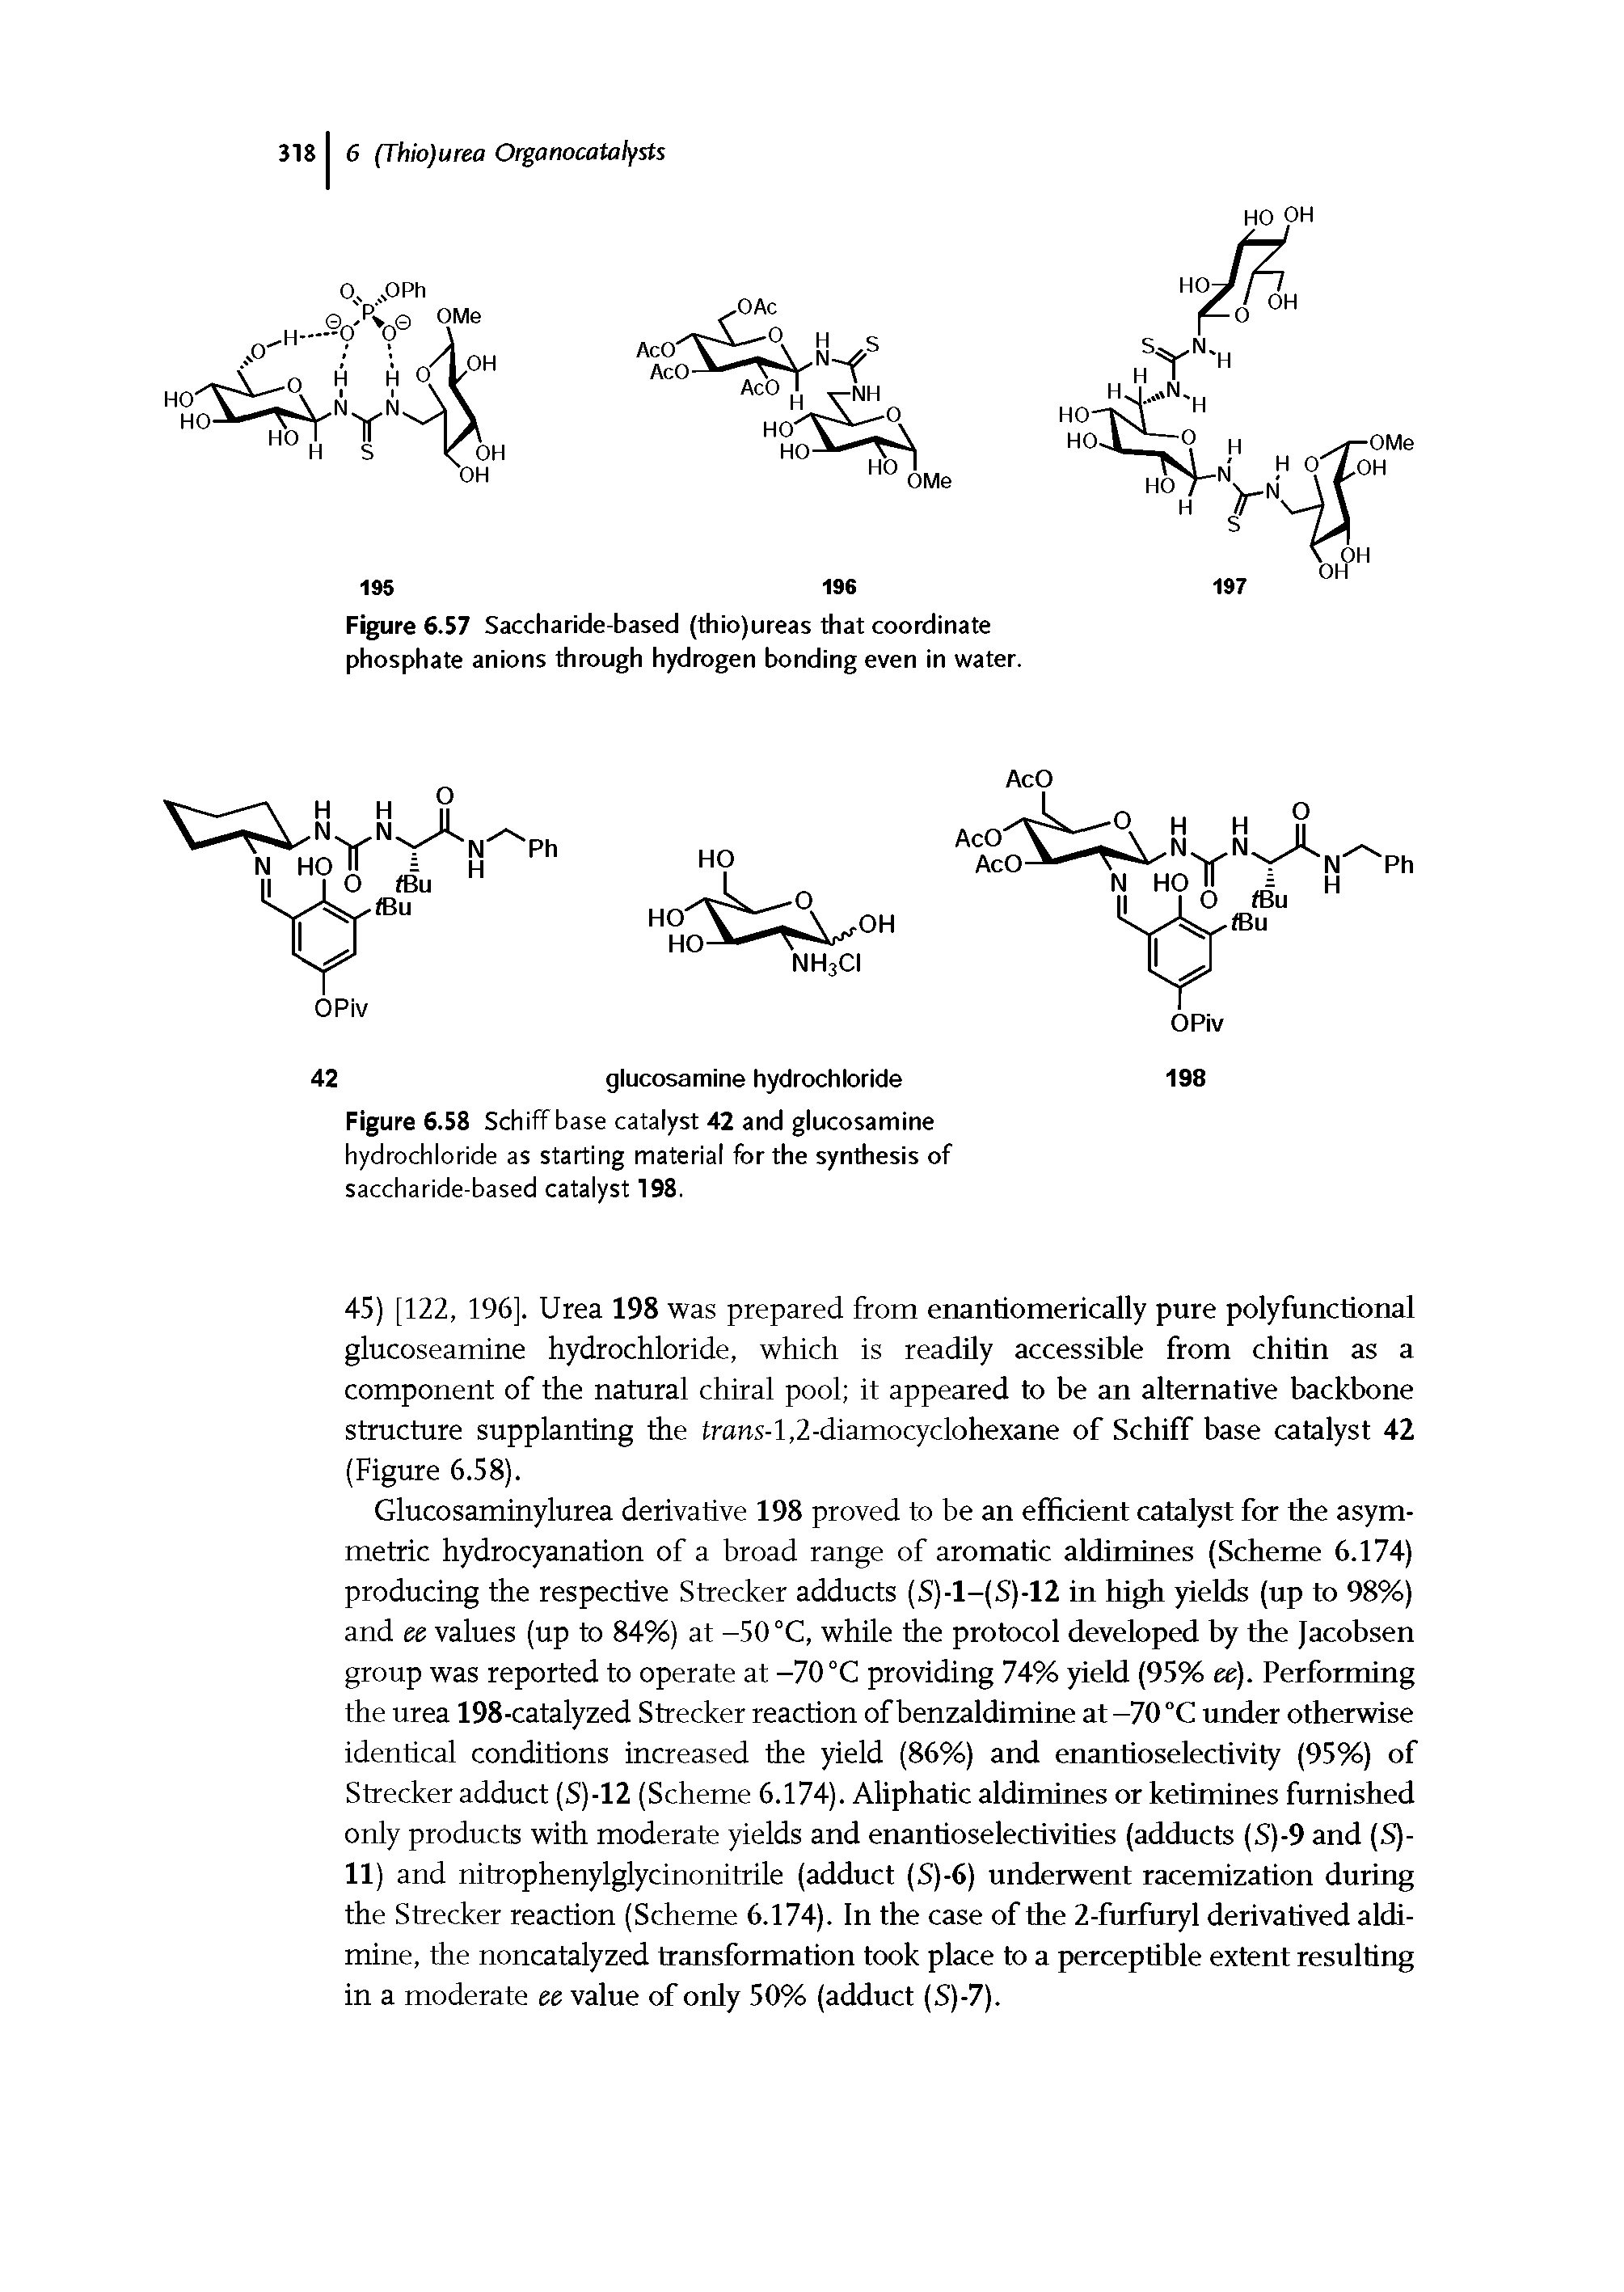 Figure 6.58 Schiff base catalyst 42 and glucosamine hydrochloride as starting material for the synthesis of saccharide-based catalyst 198.